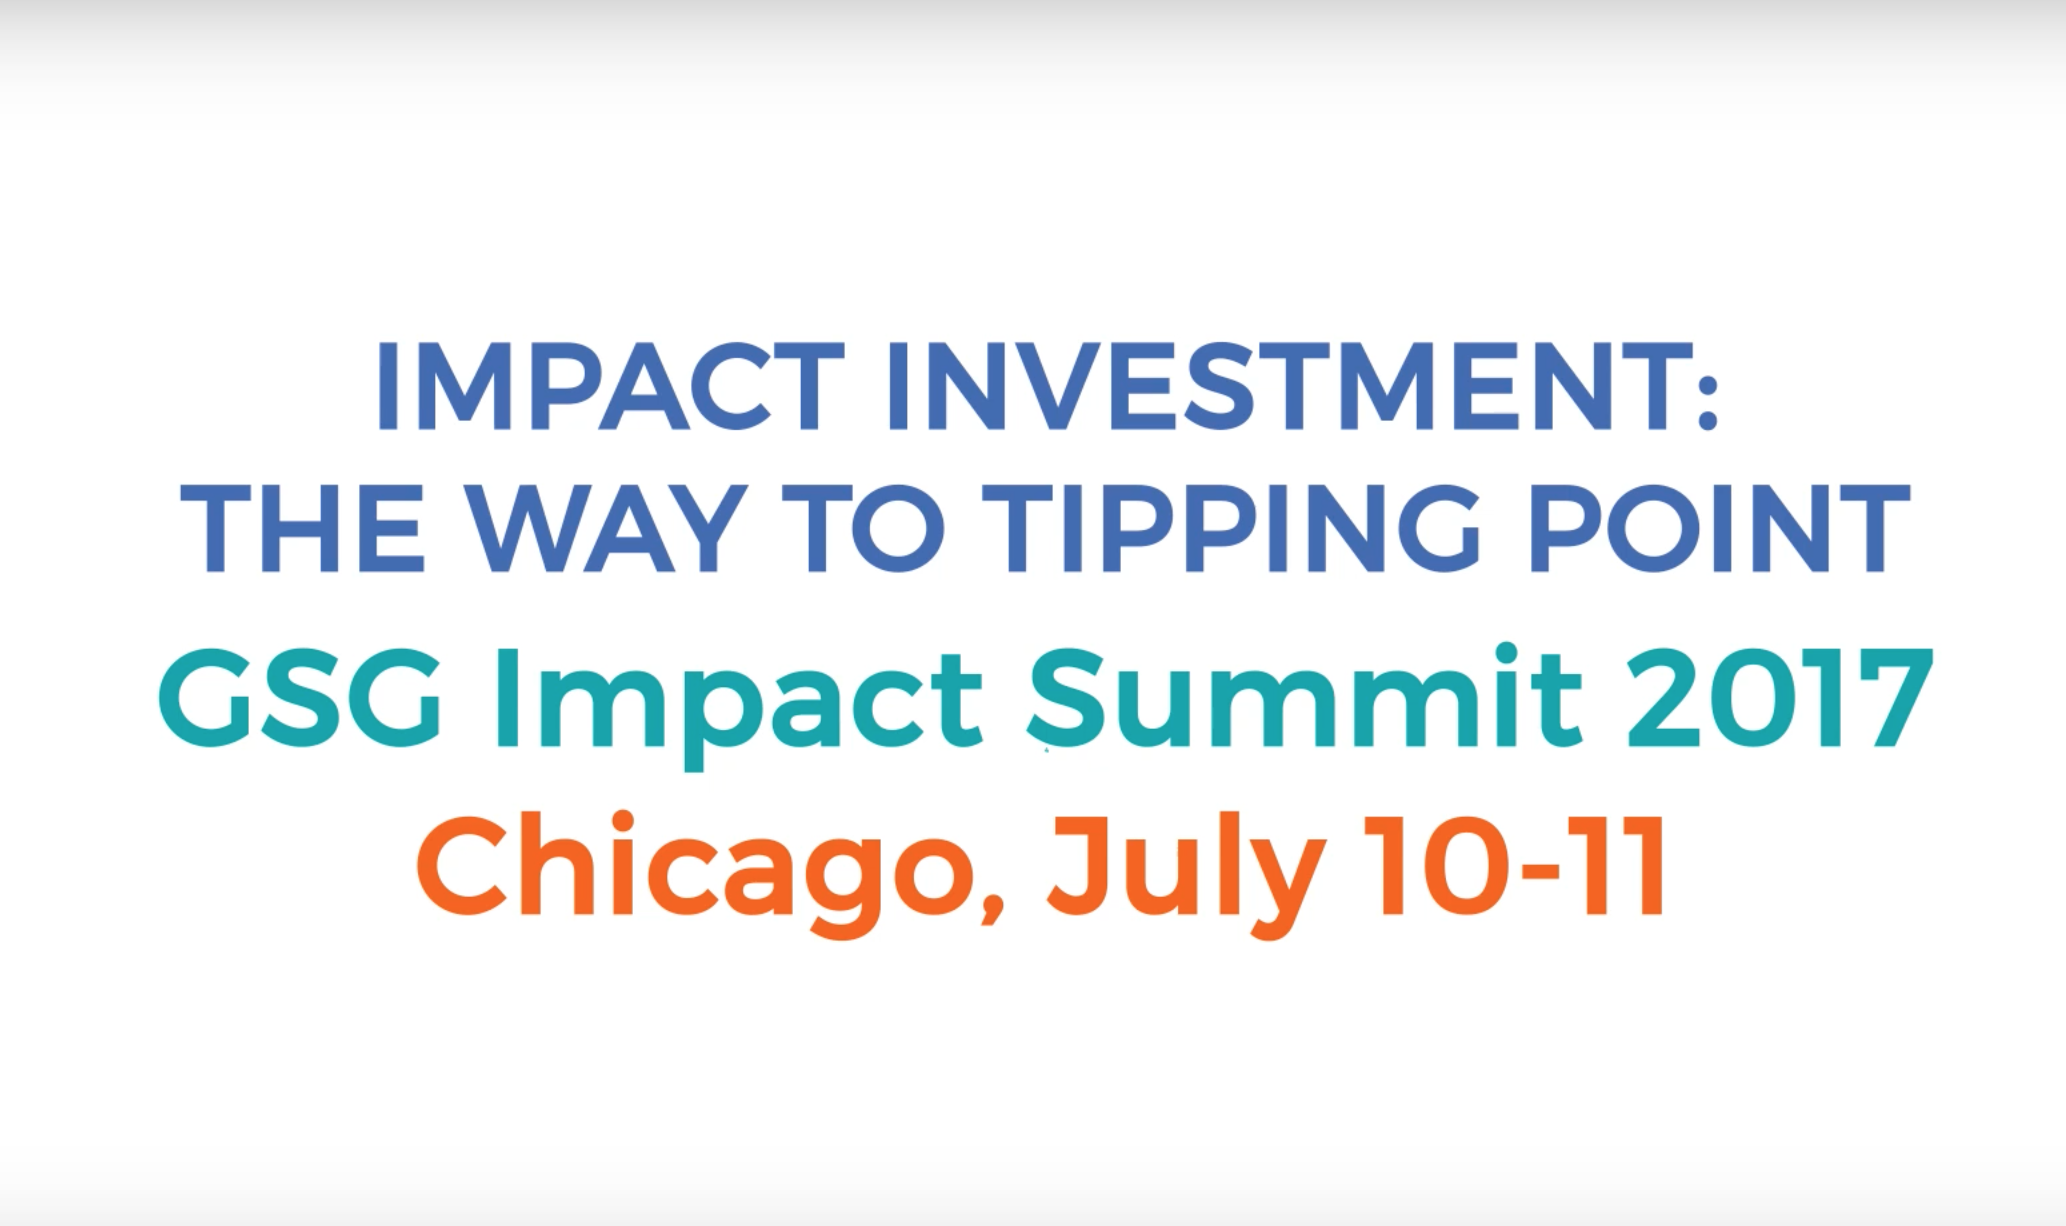 Impact Investment: The Way to the Tipping Point